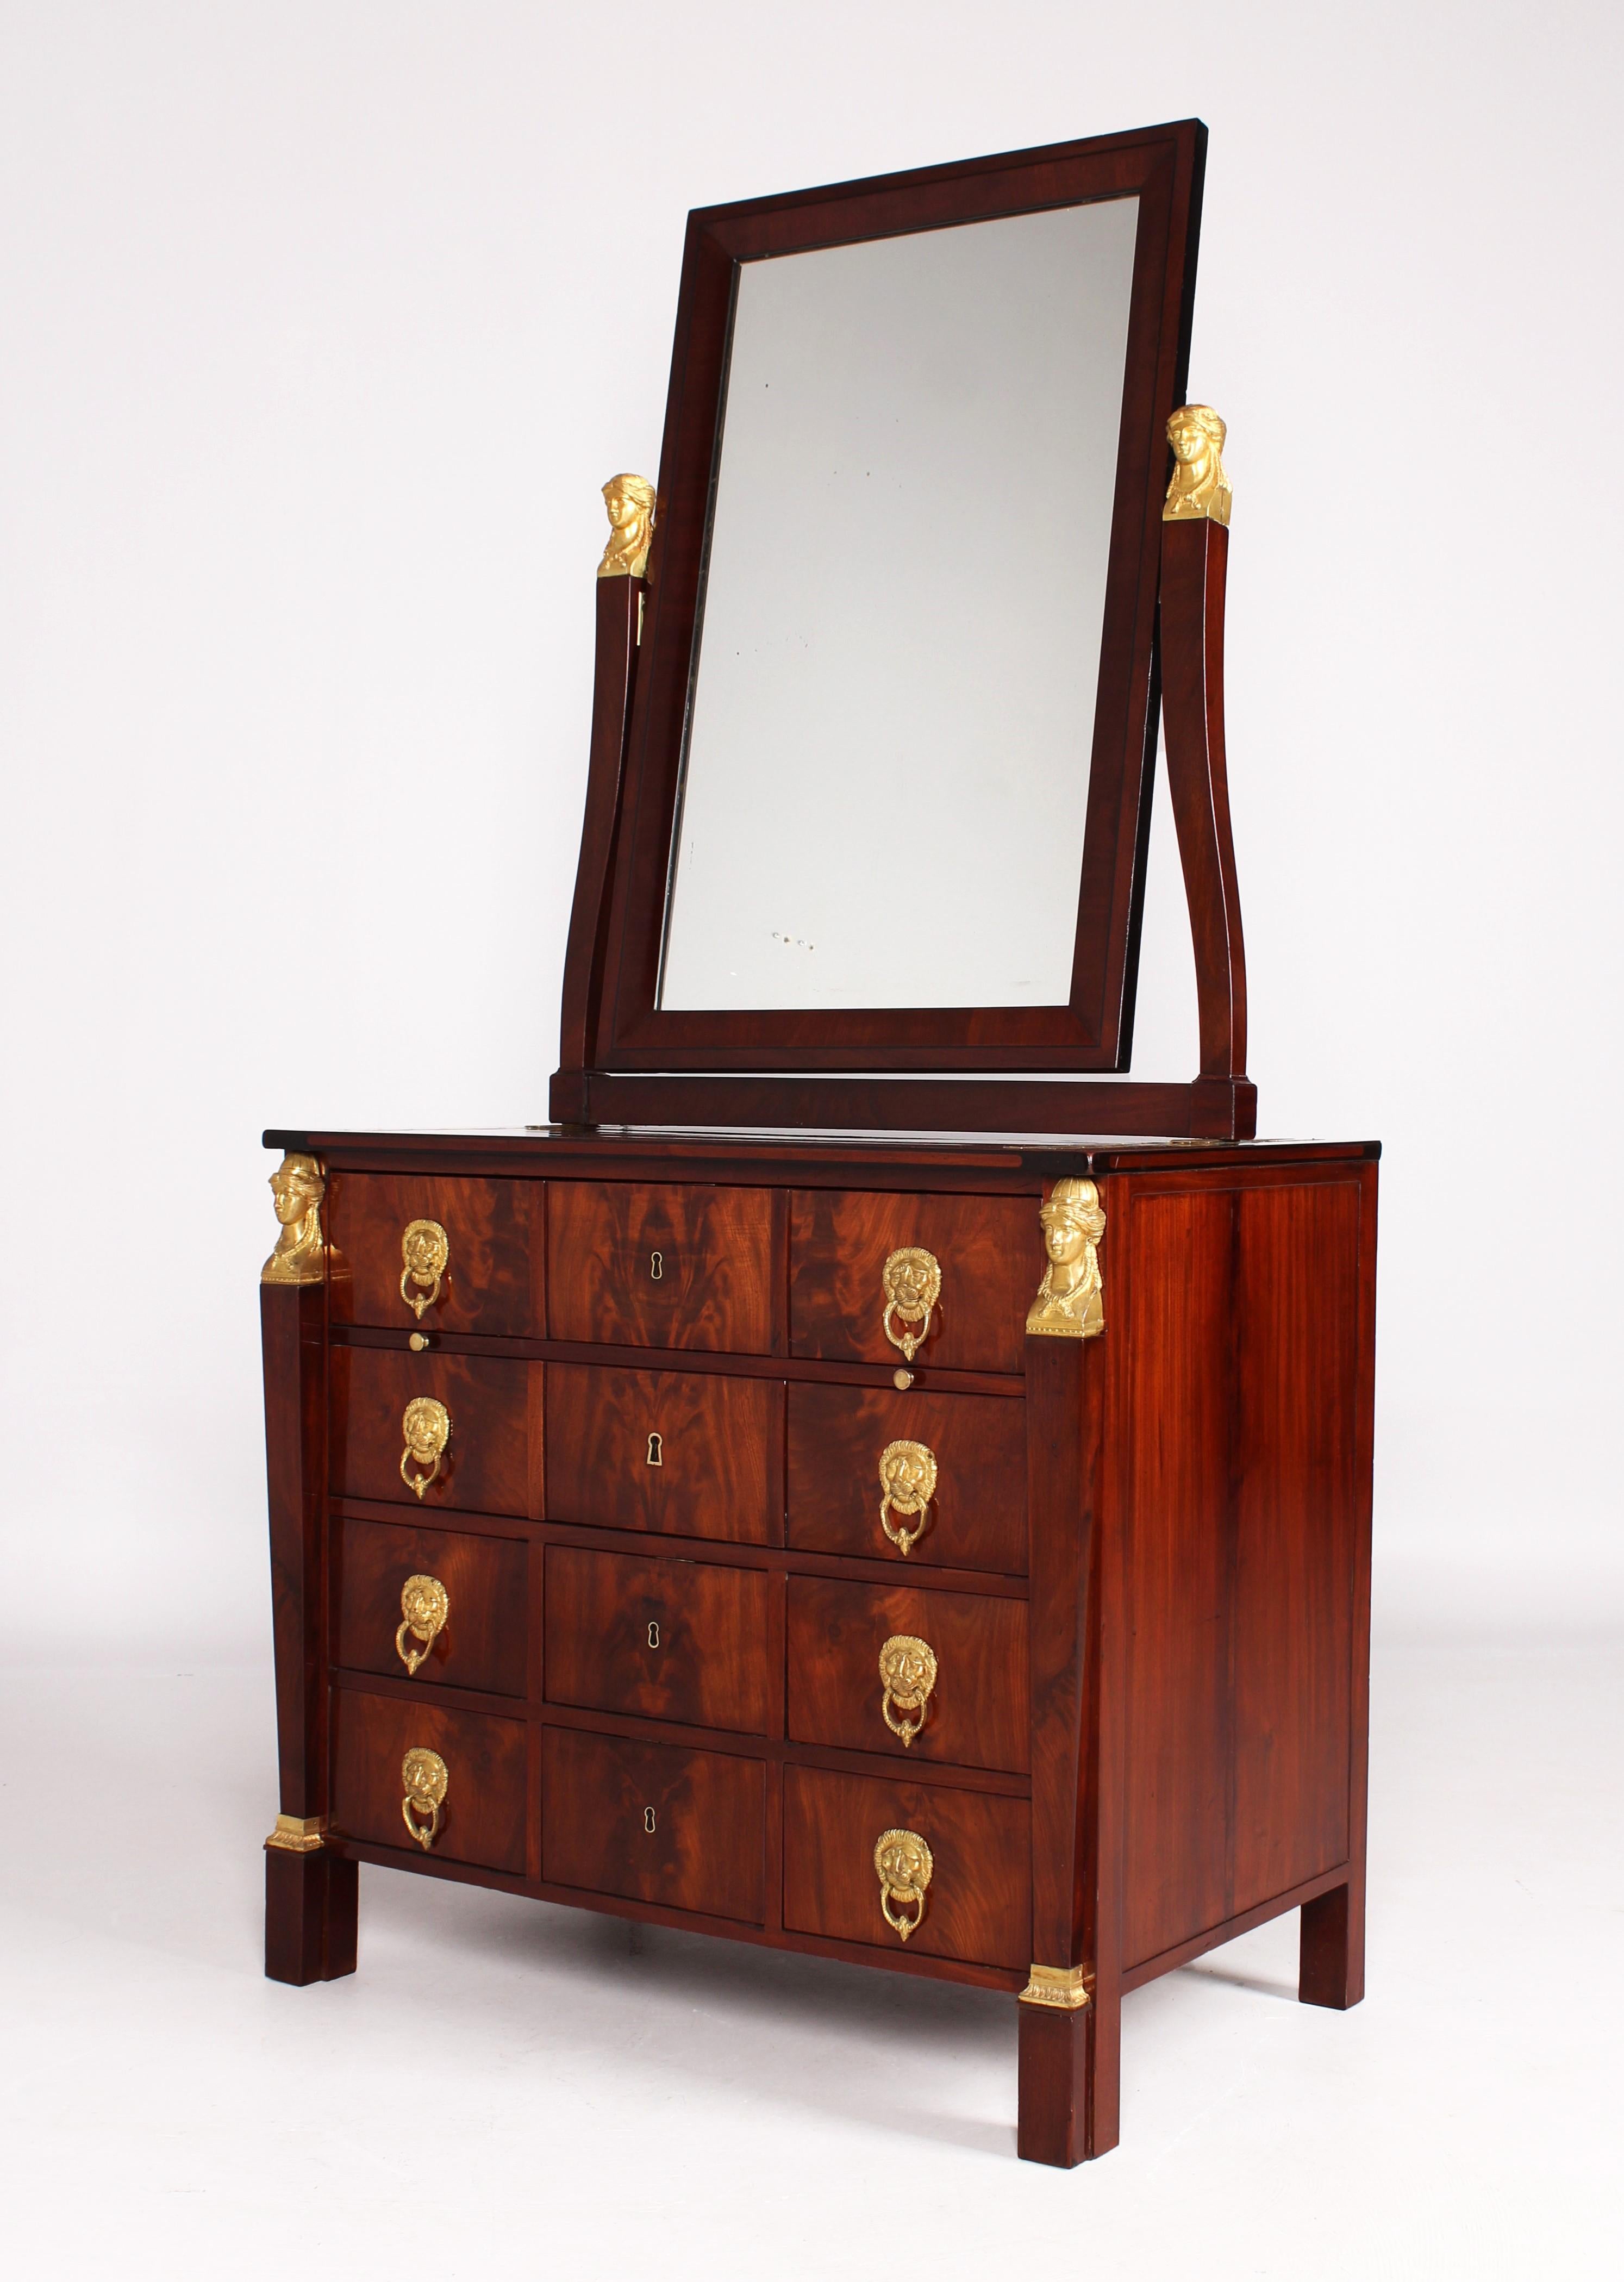 Dresser, Chest of Drawers, Mirror, stamped Jean-Joseph Chapuis, Brussels c. 1810 For Sale 4